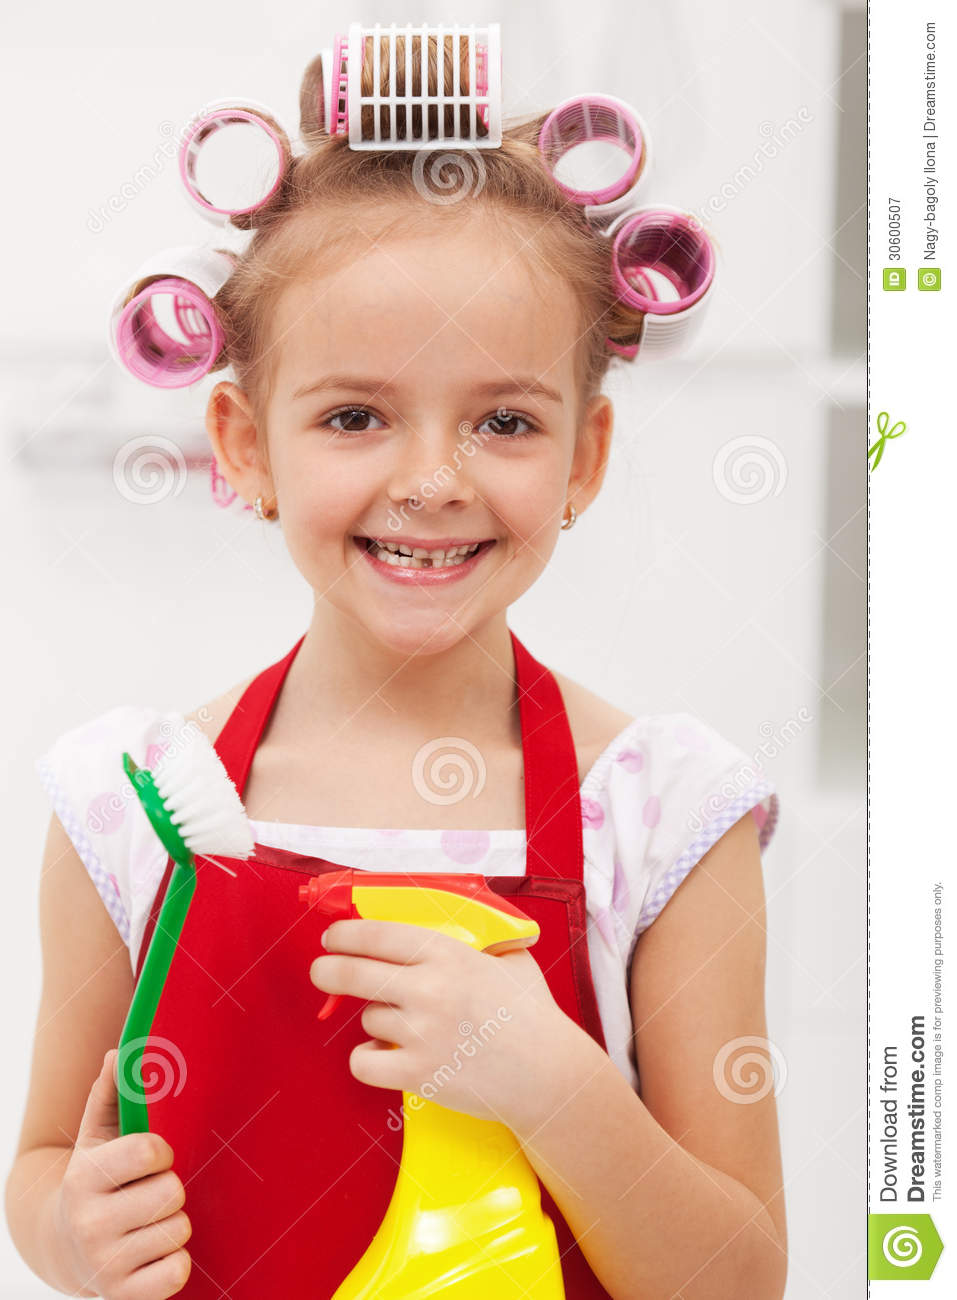 Little Girl With Cleaning Utensils Royalty Free Stock Photography    